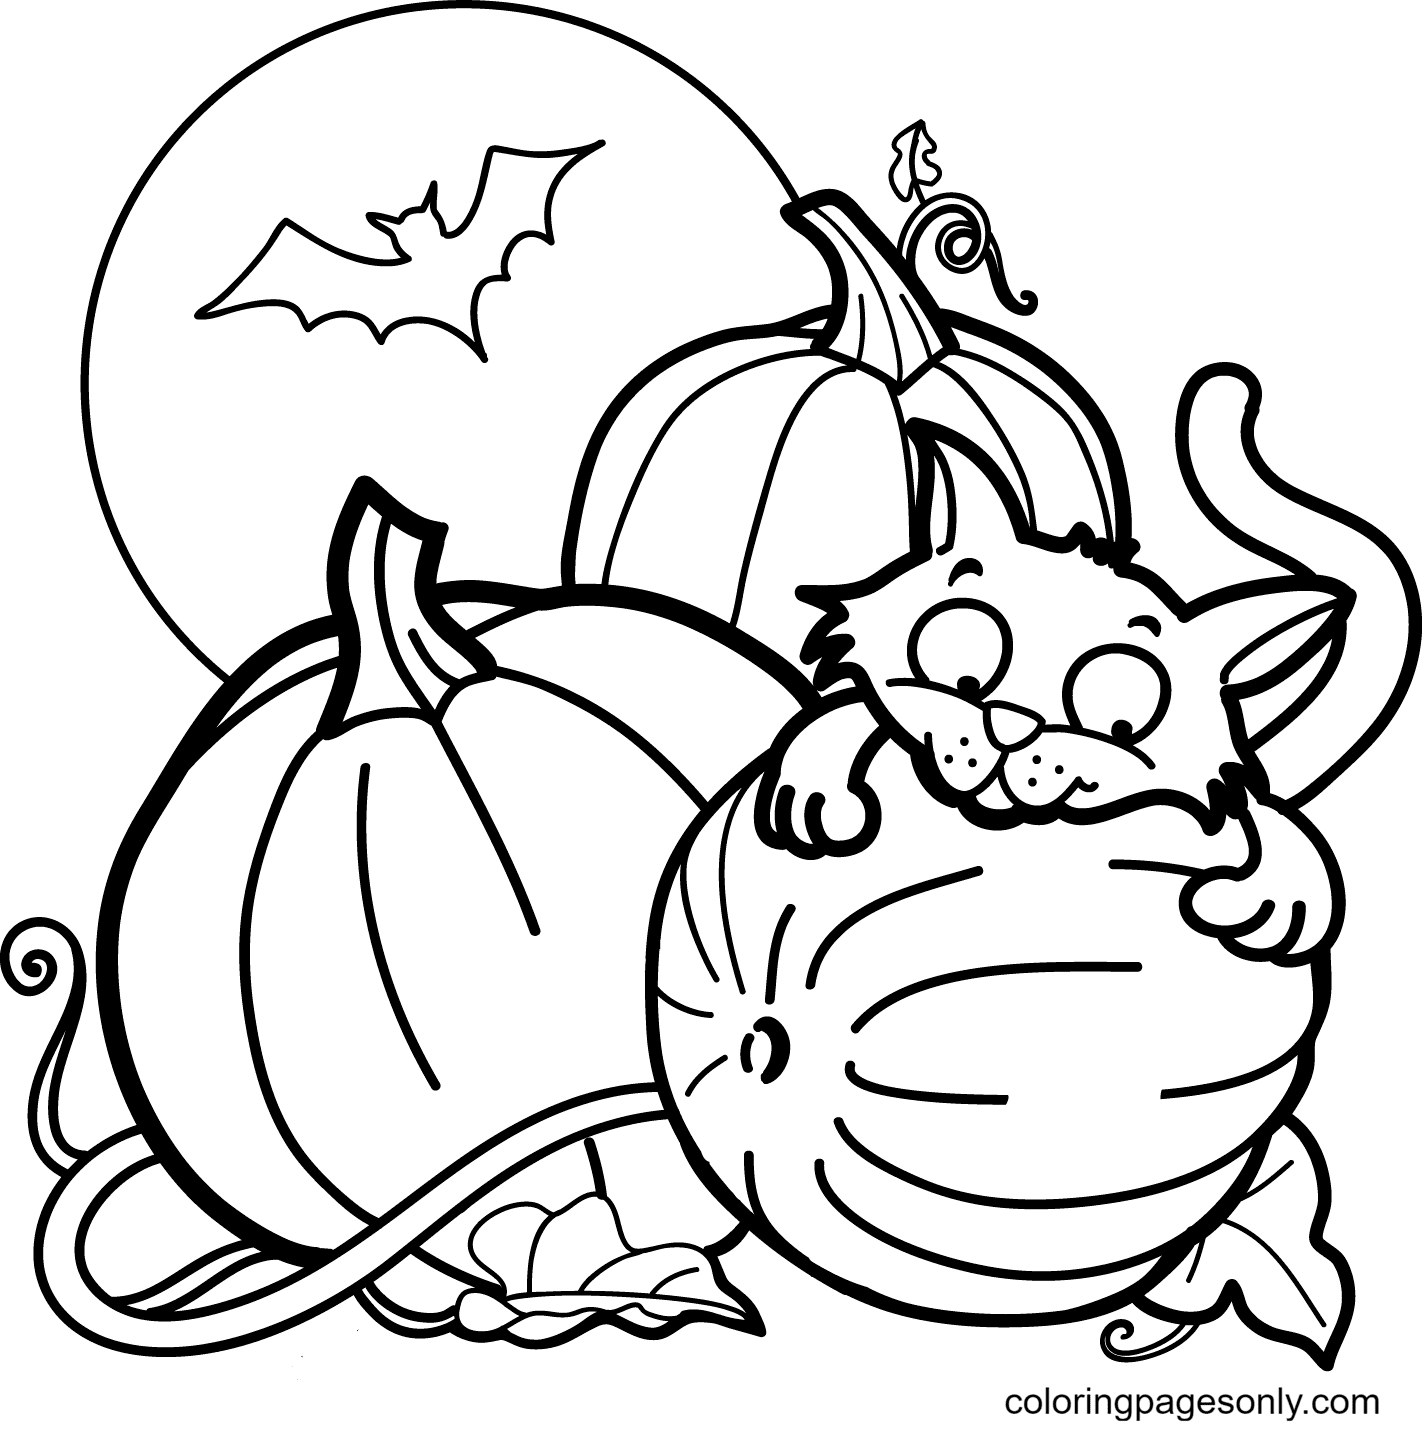 Cat, Pumpkin and a Bat for Halloween Coloring Pages